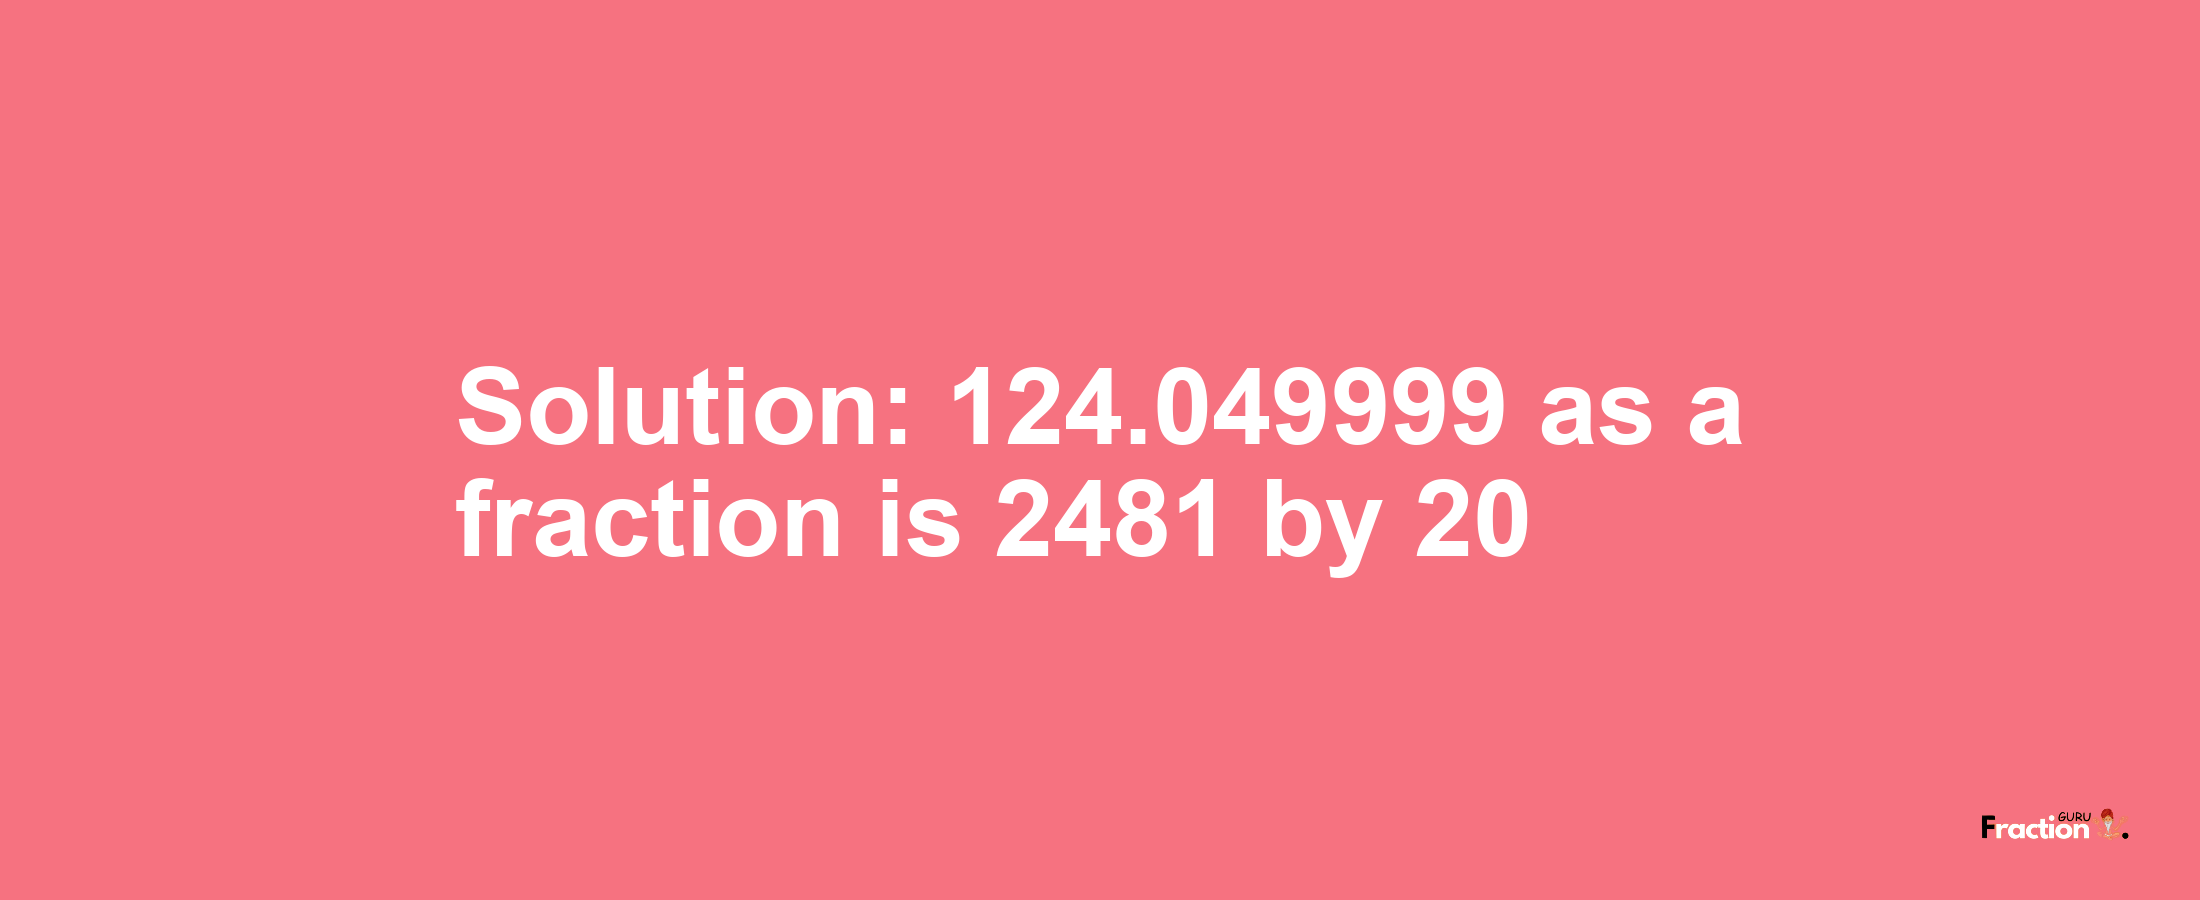 Solution:124.049999 as a fraction is 2481/20